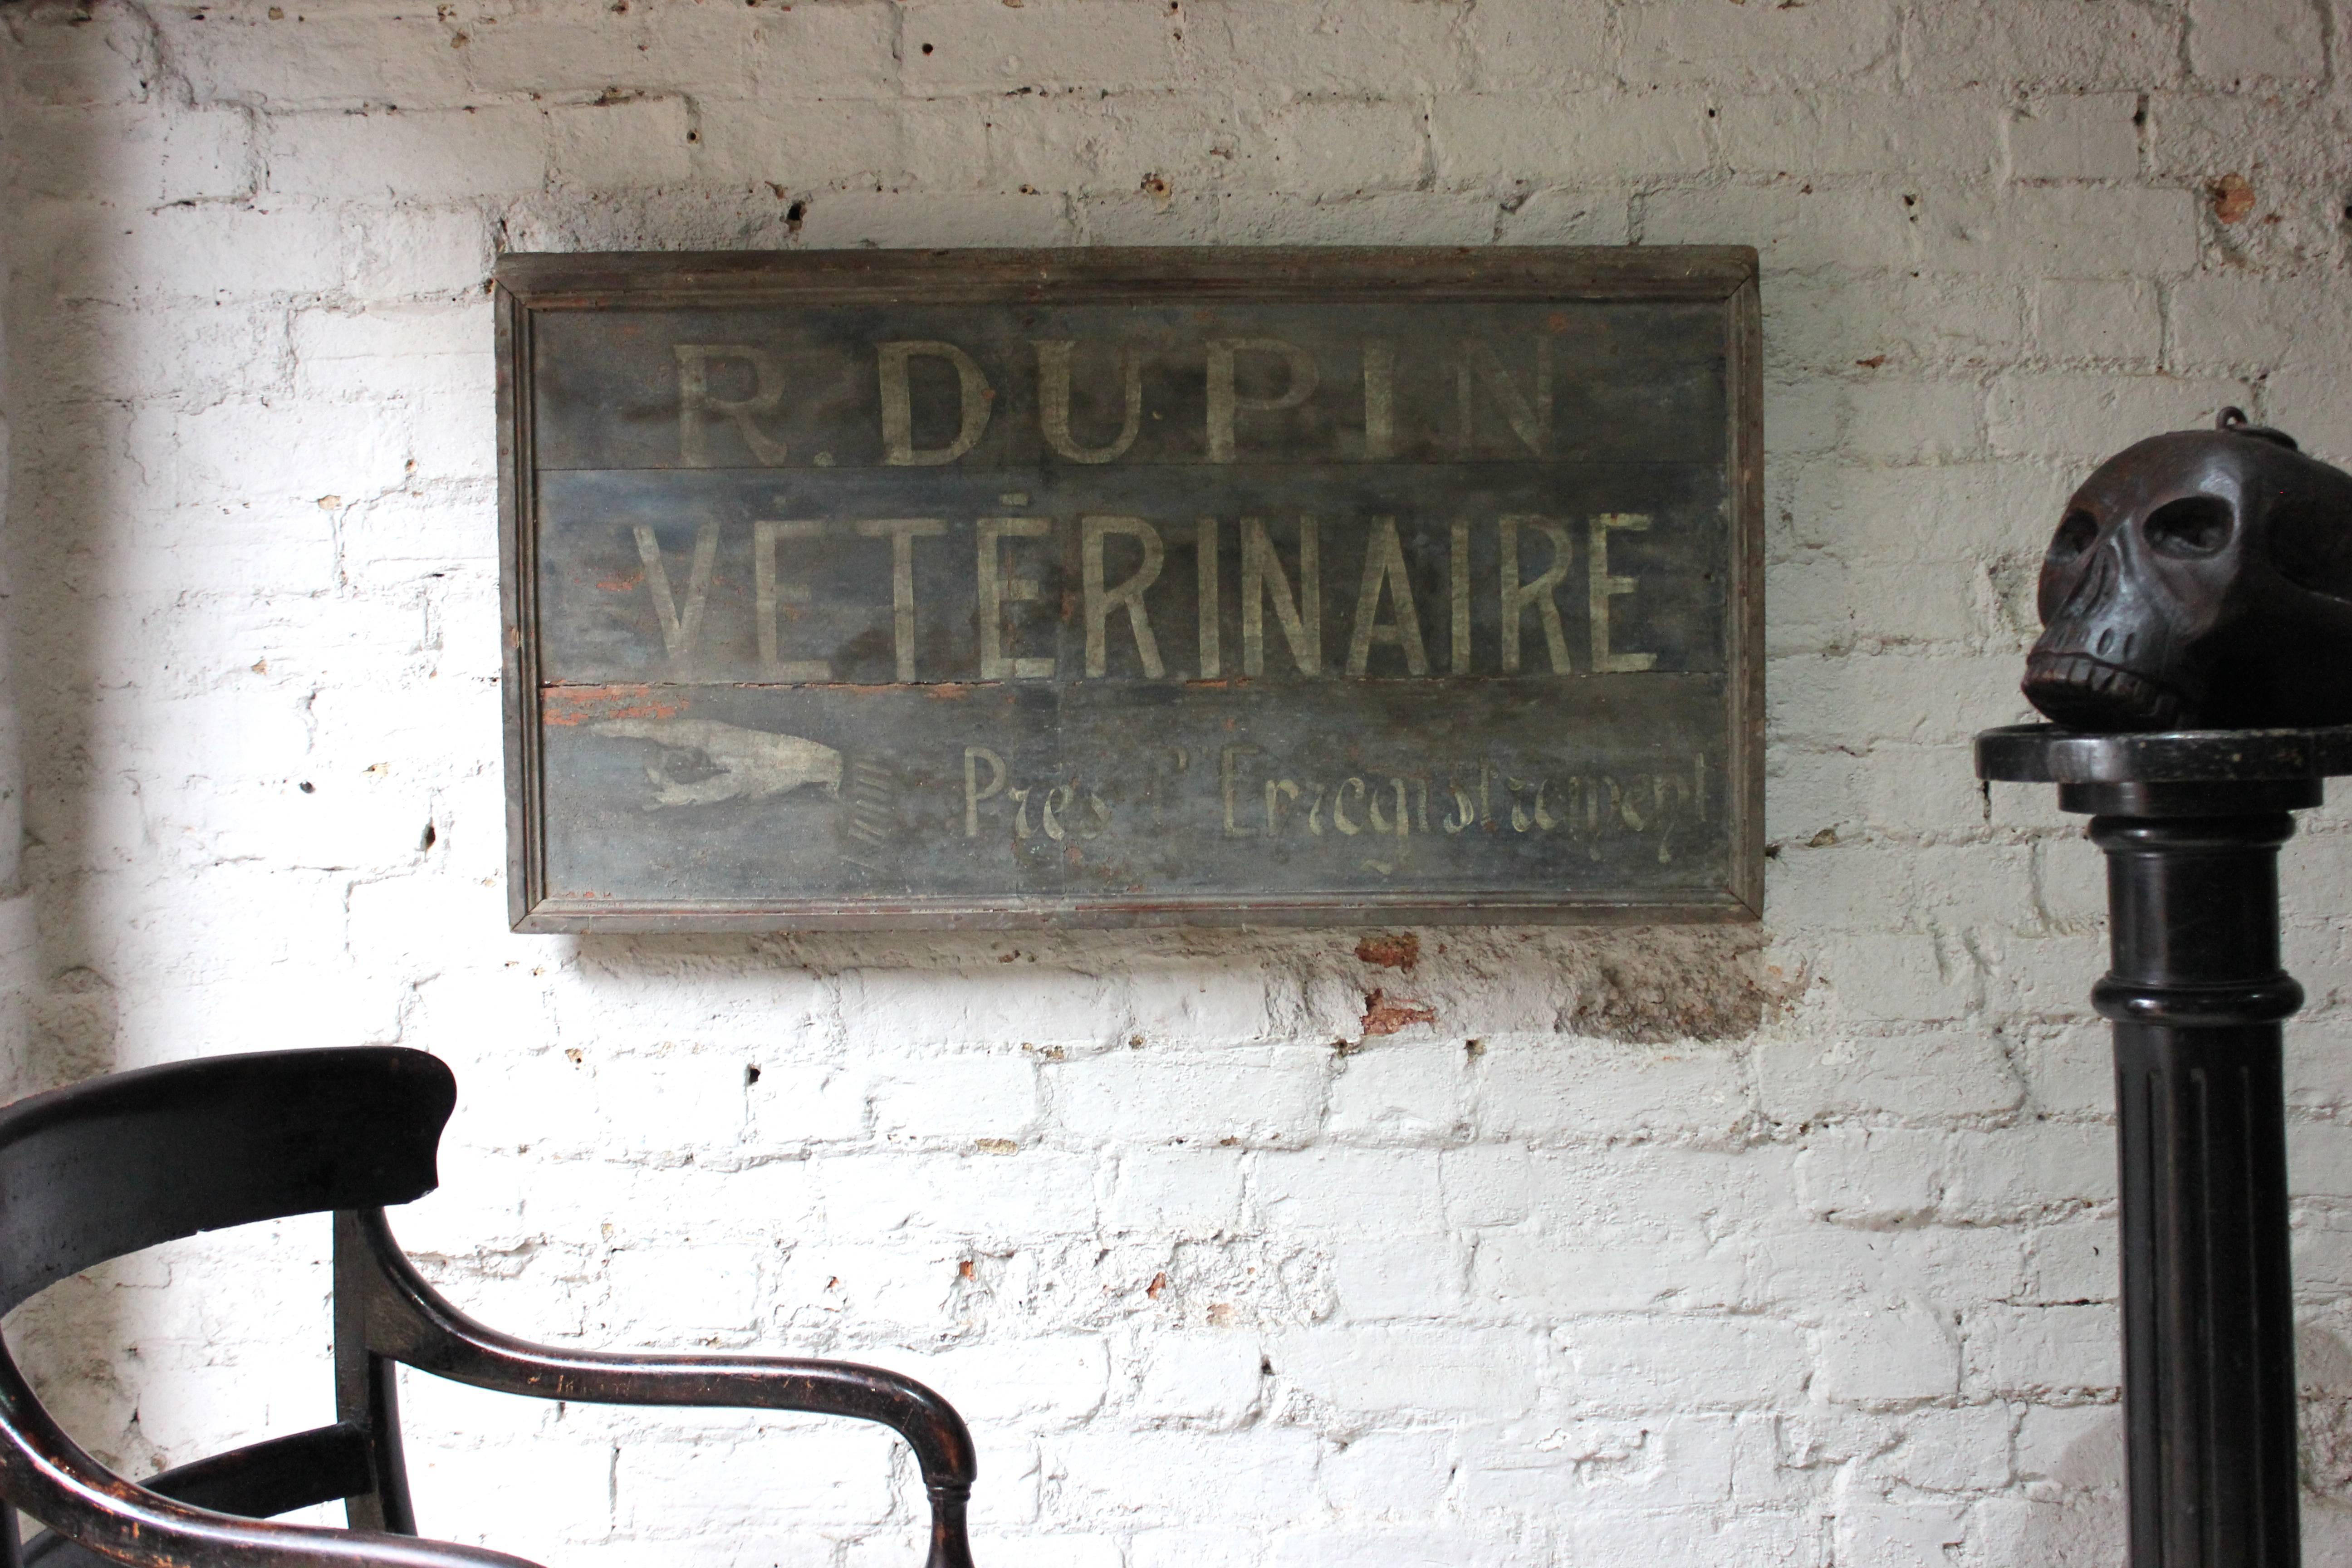 Folk Art French Painted and Sign Written Veterinary Trade Sign for R.Dupin Veterinaire